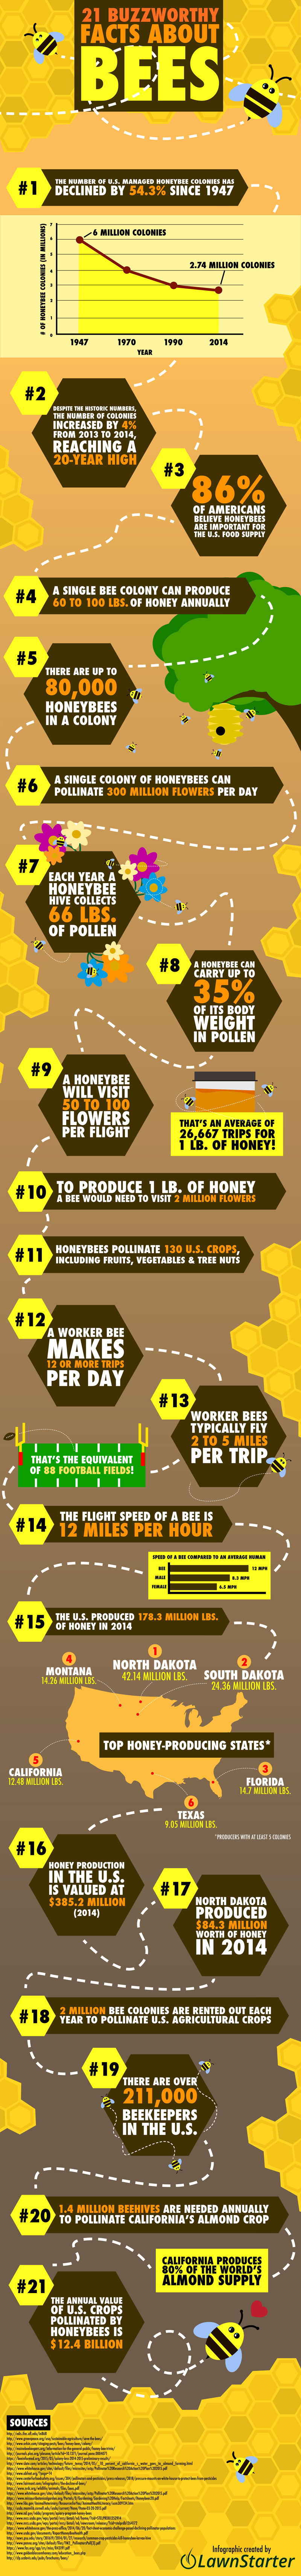 Nine buzzworthy facts about the honeybee